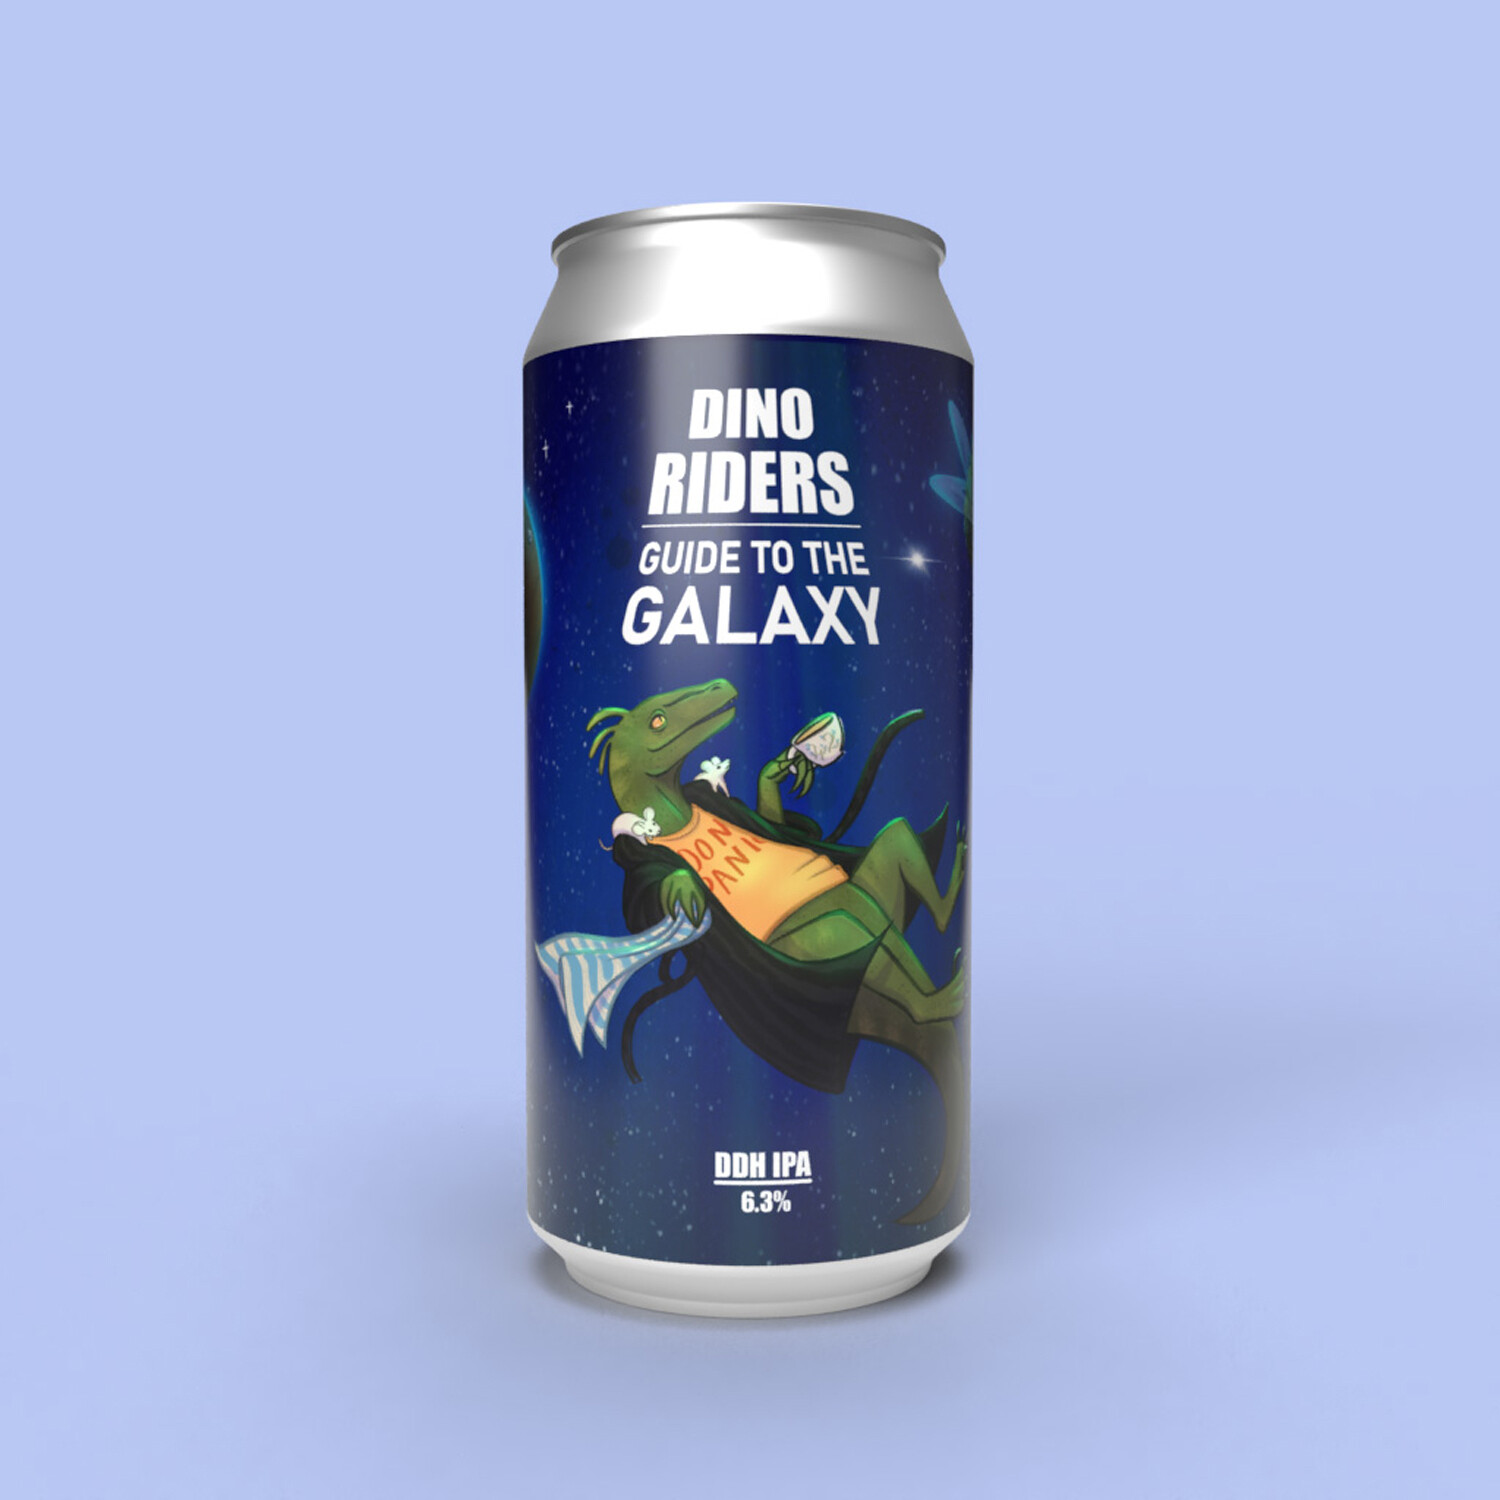 Staggeringly Good Dino Riders Guide To The Galaxy DDH IPA